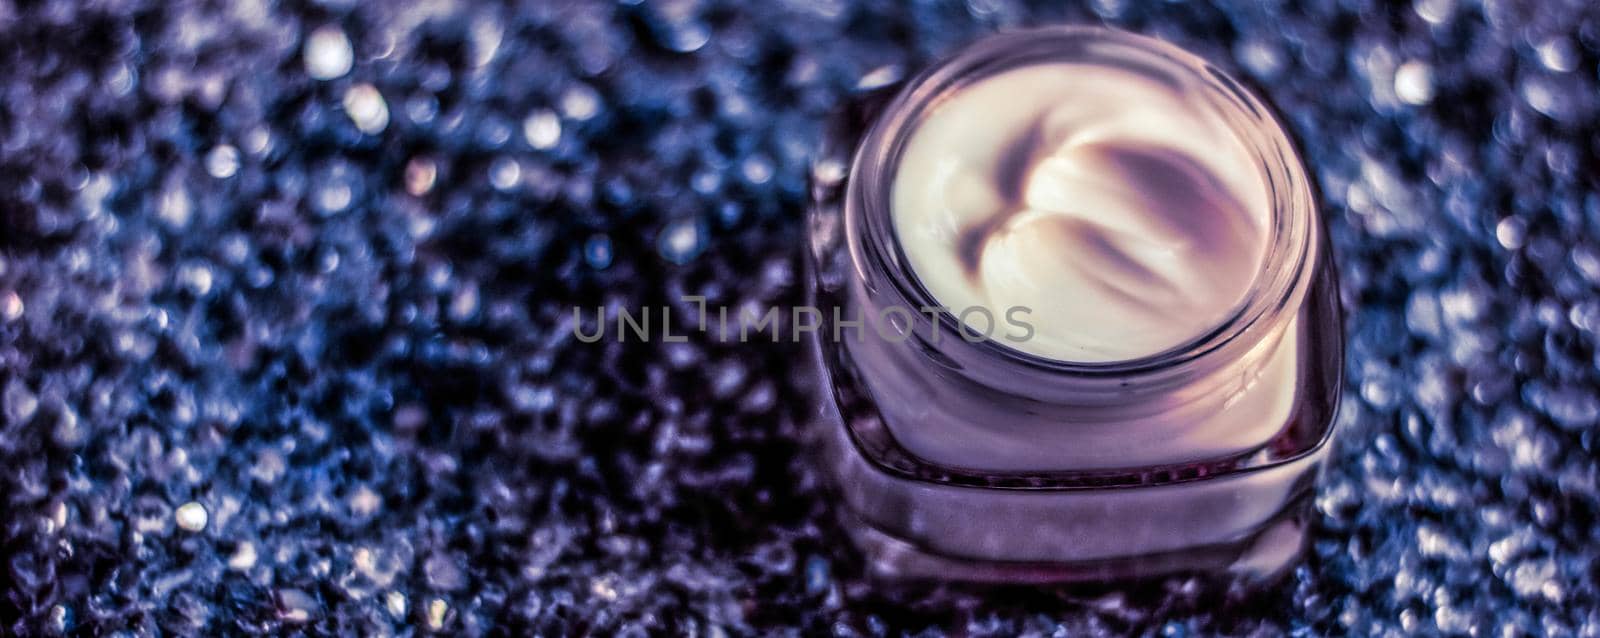 Cosmetic branding, sunscreen spf and facial care concept - Luxury face cream for healthy skin on shiny glitter sunlight background, moisturizing cosmetics and natural skincare beauty brand product